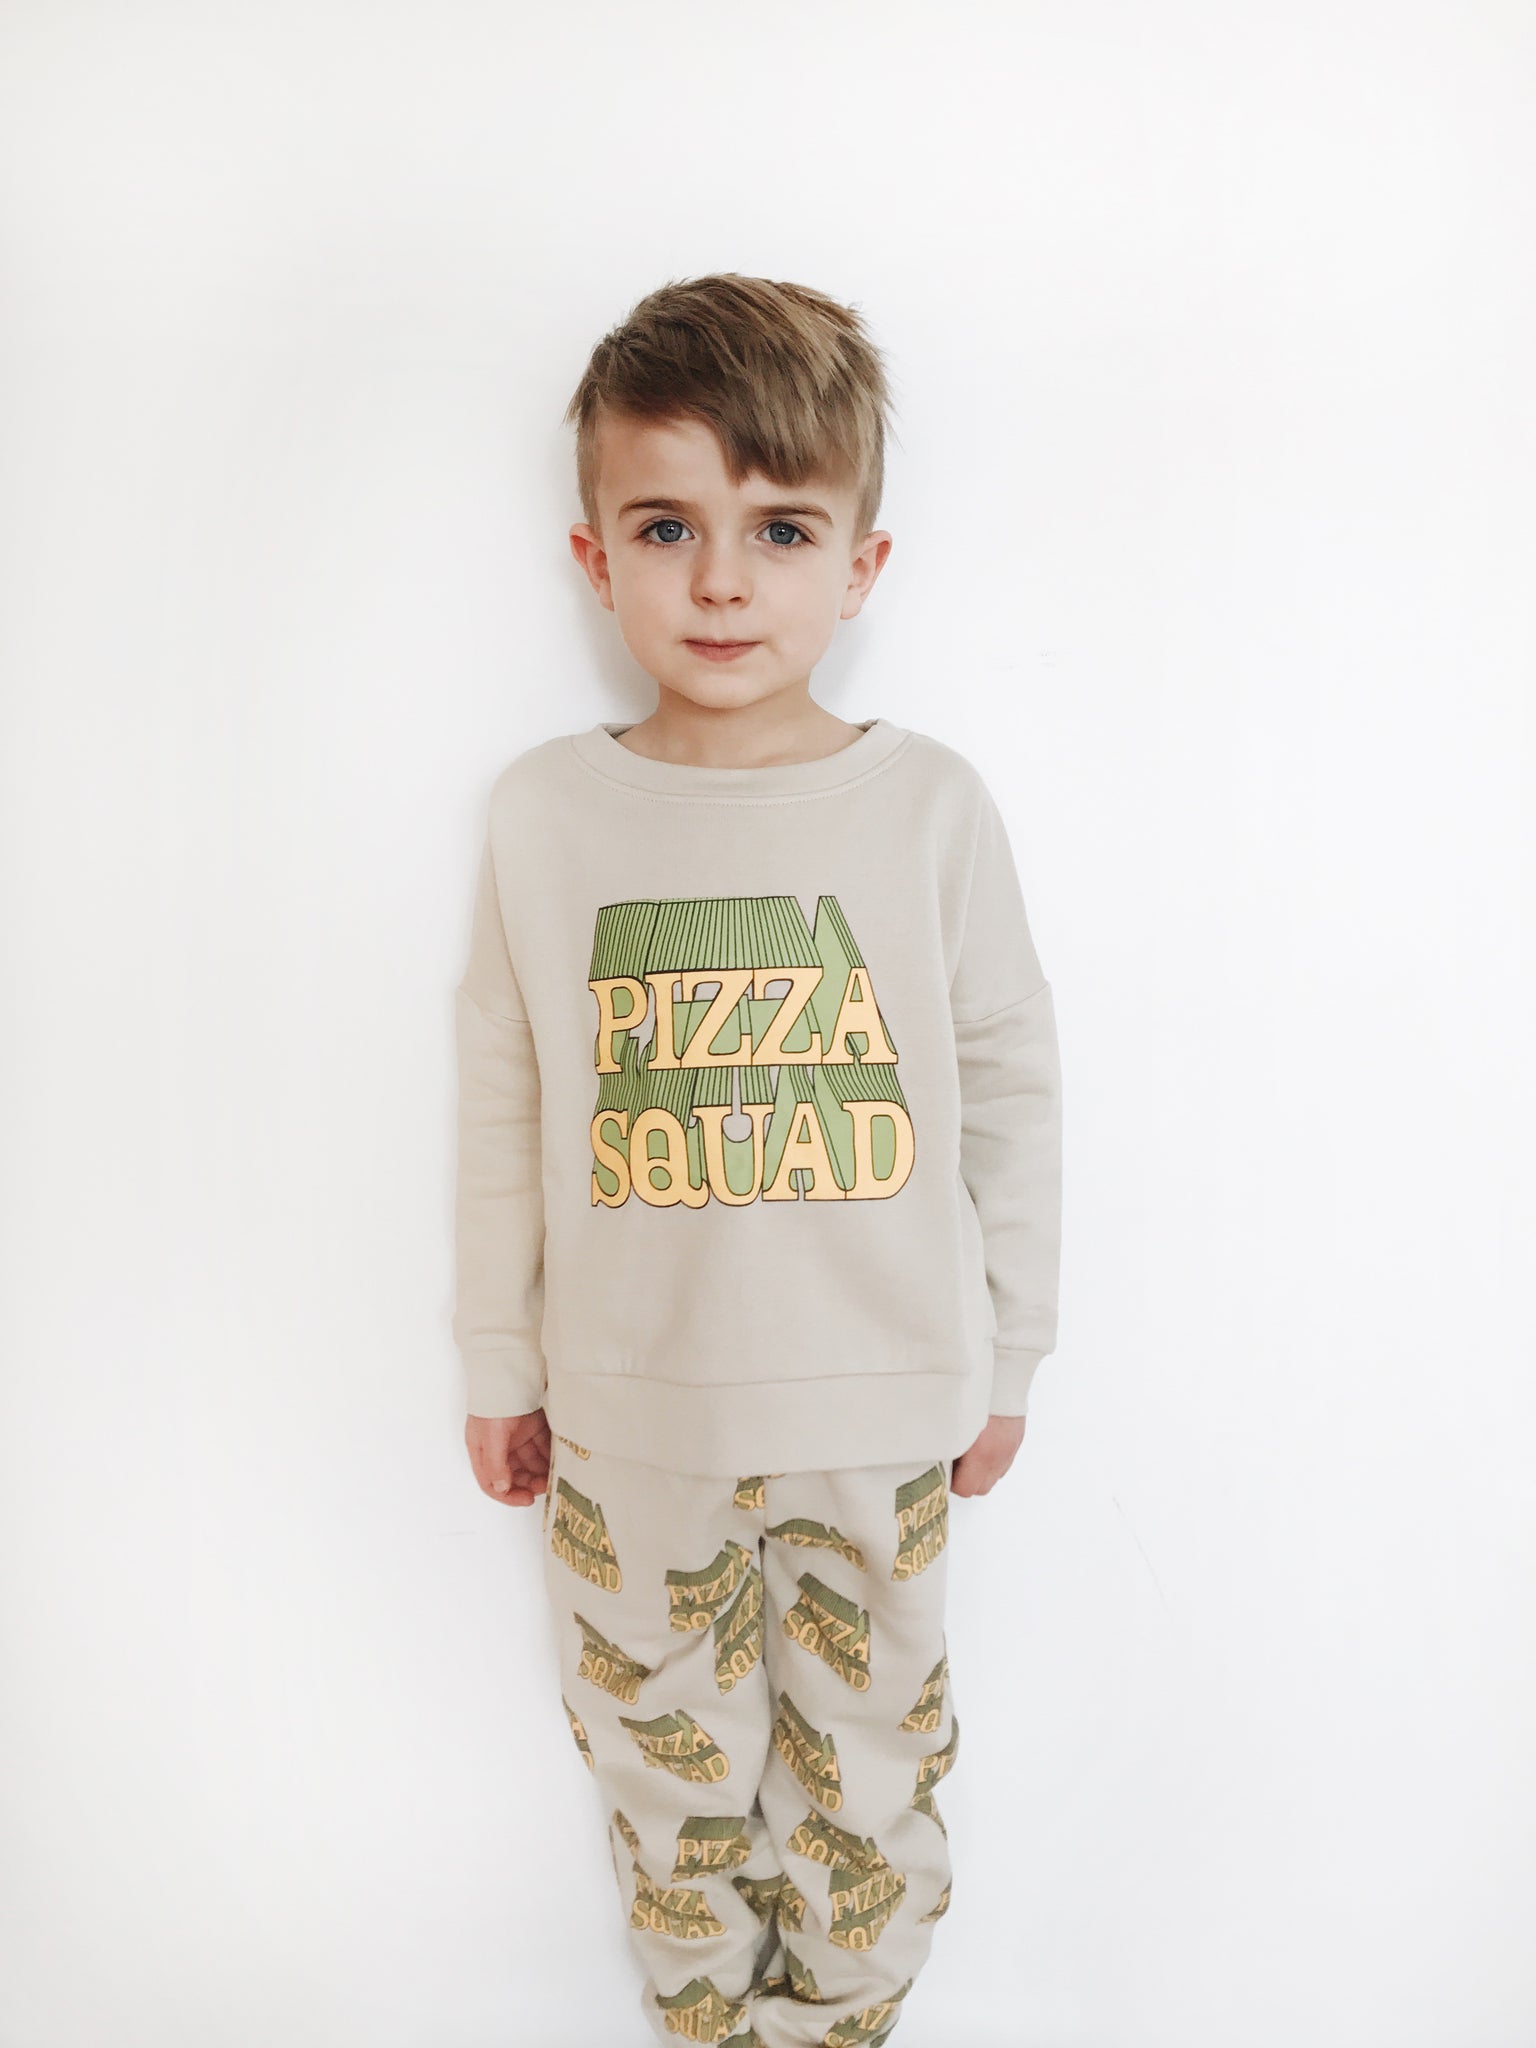 Wide Sweater Shirt - Pizza Squad